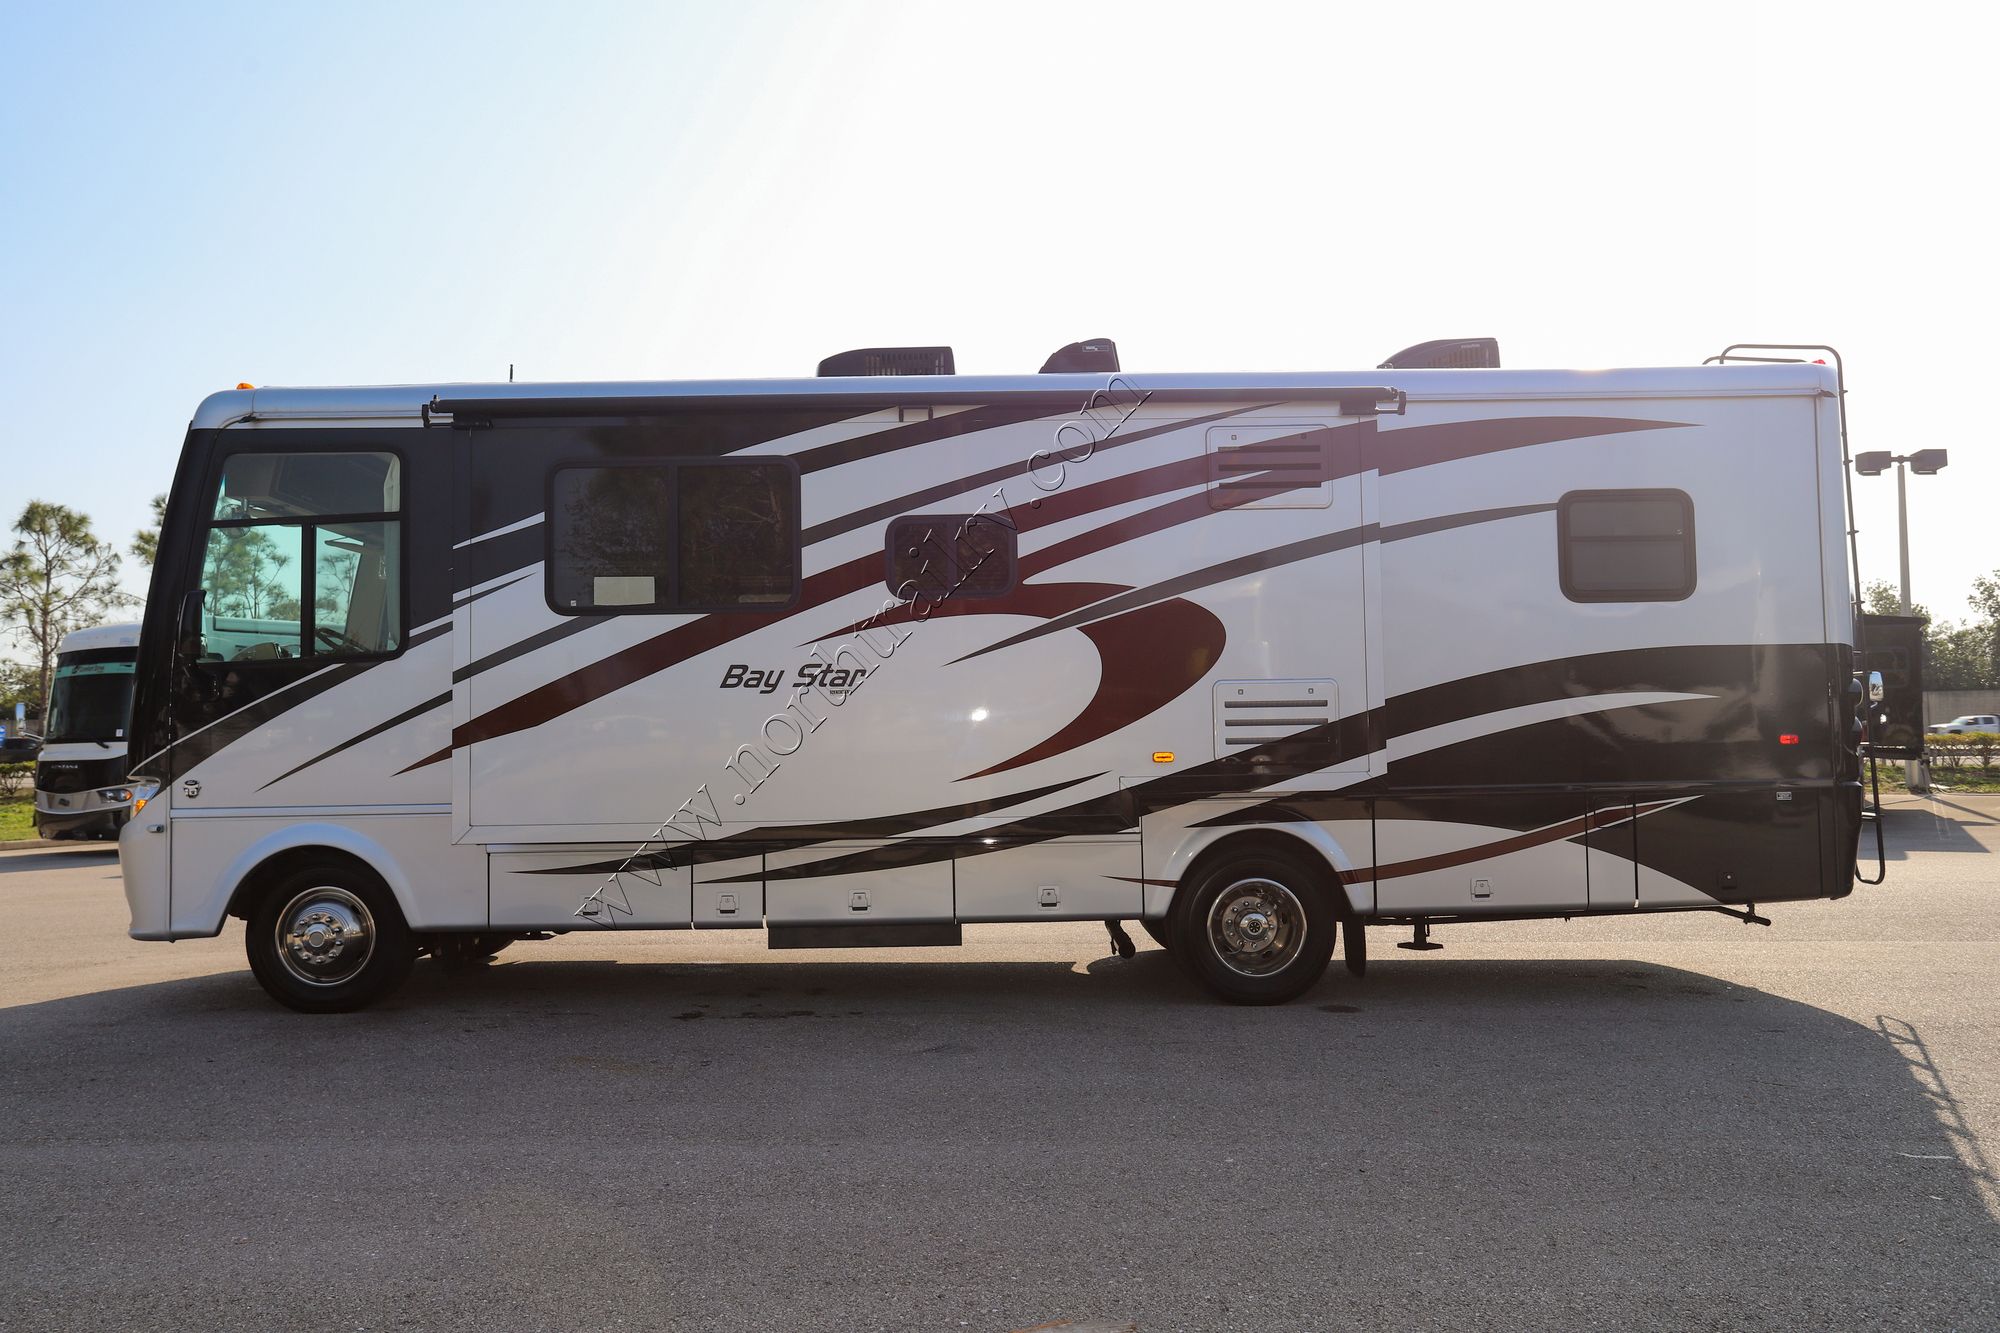 Used 2012 Newmar Bay Star 3002 Class A  For Sale